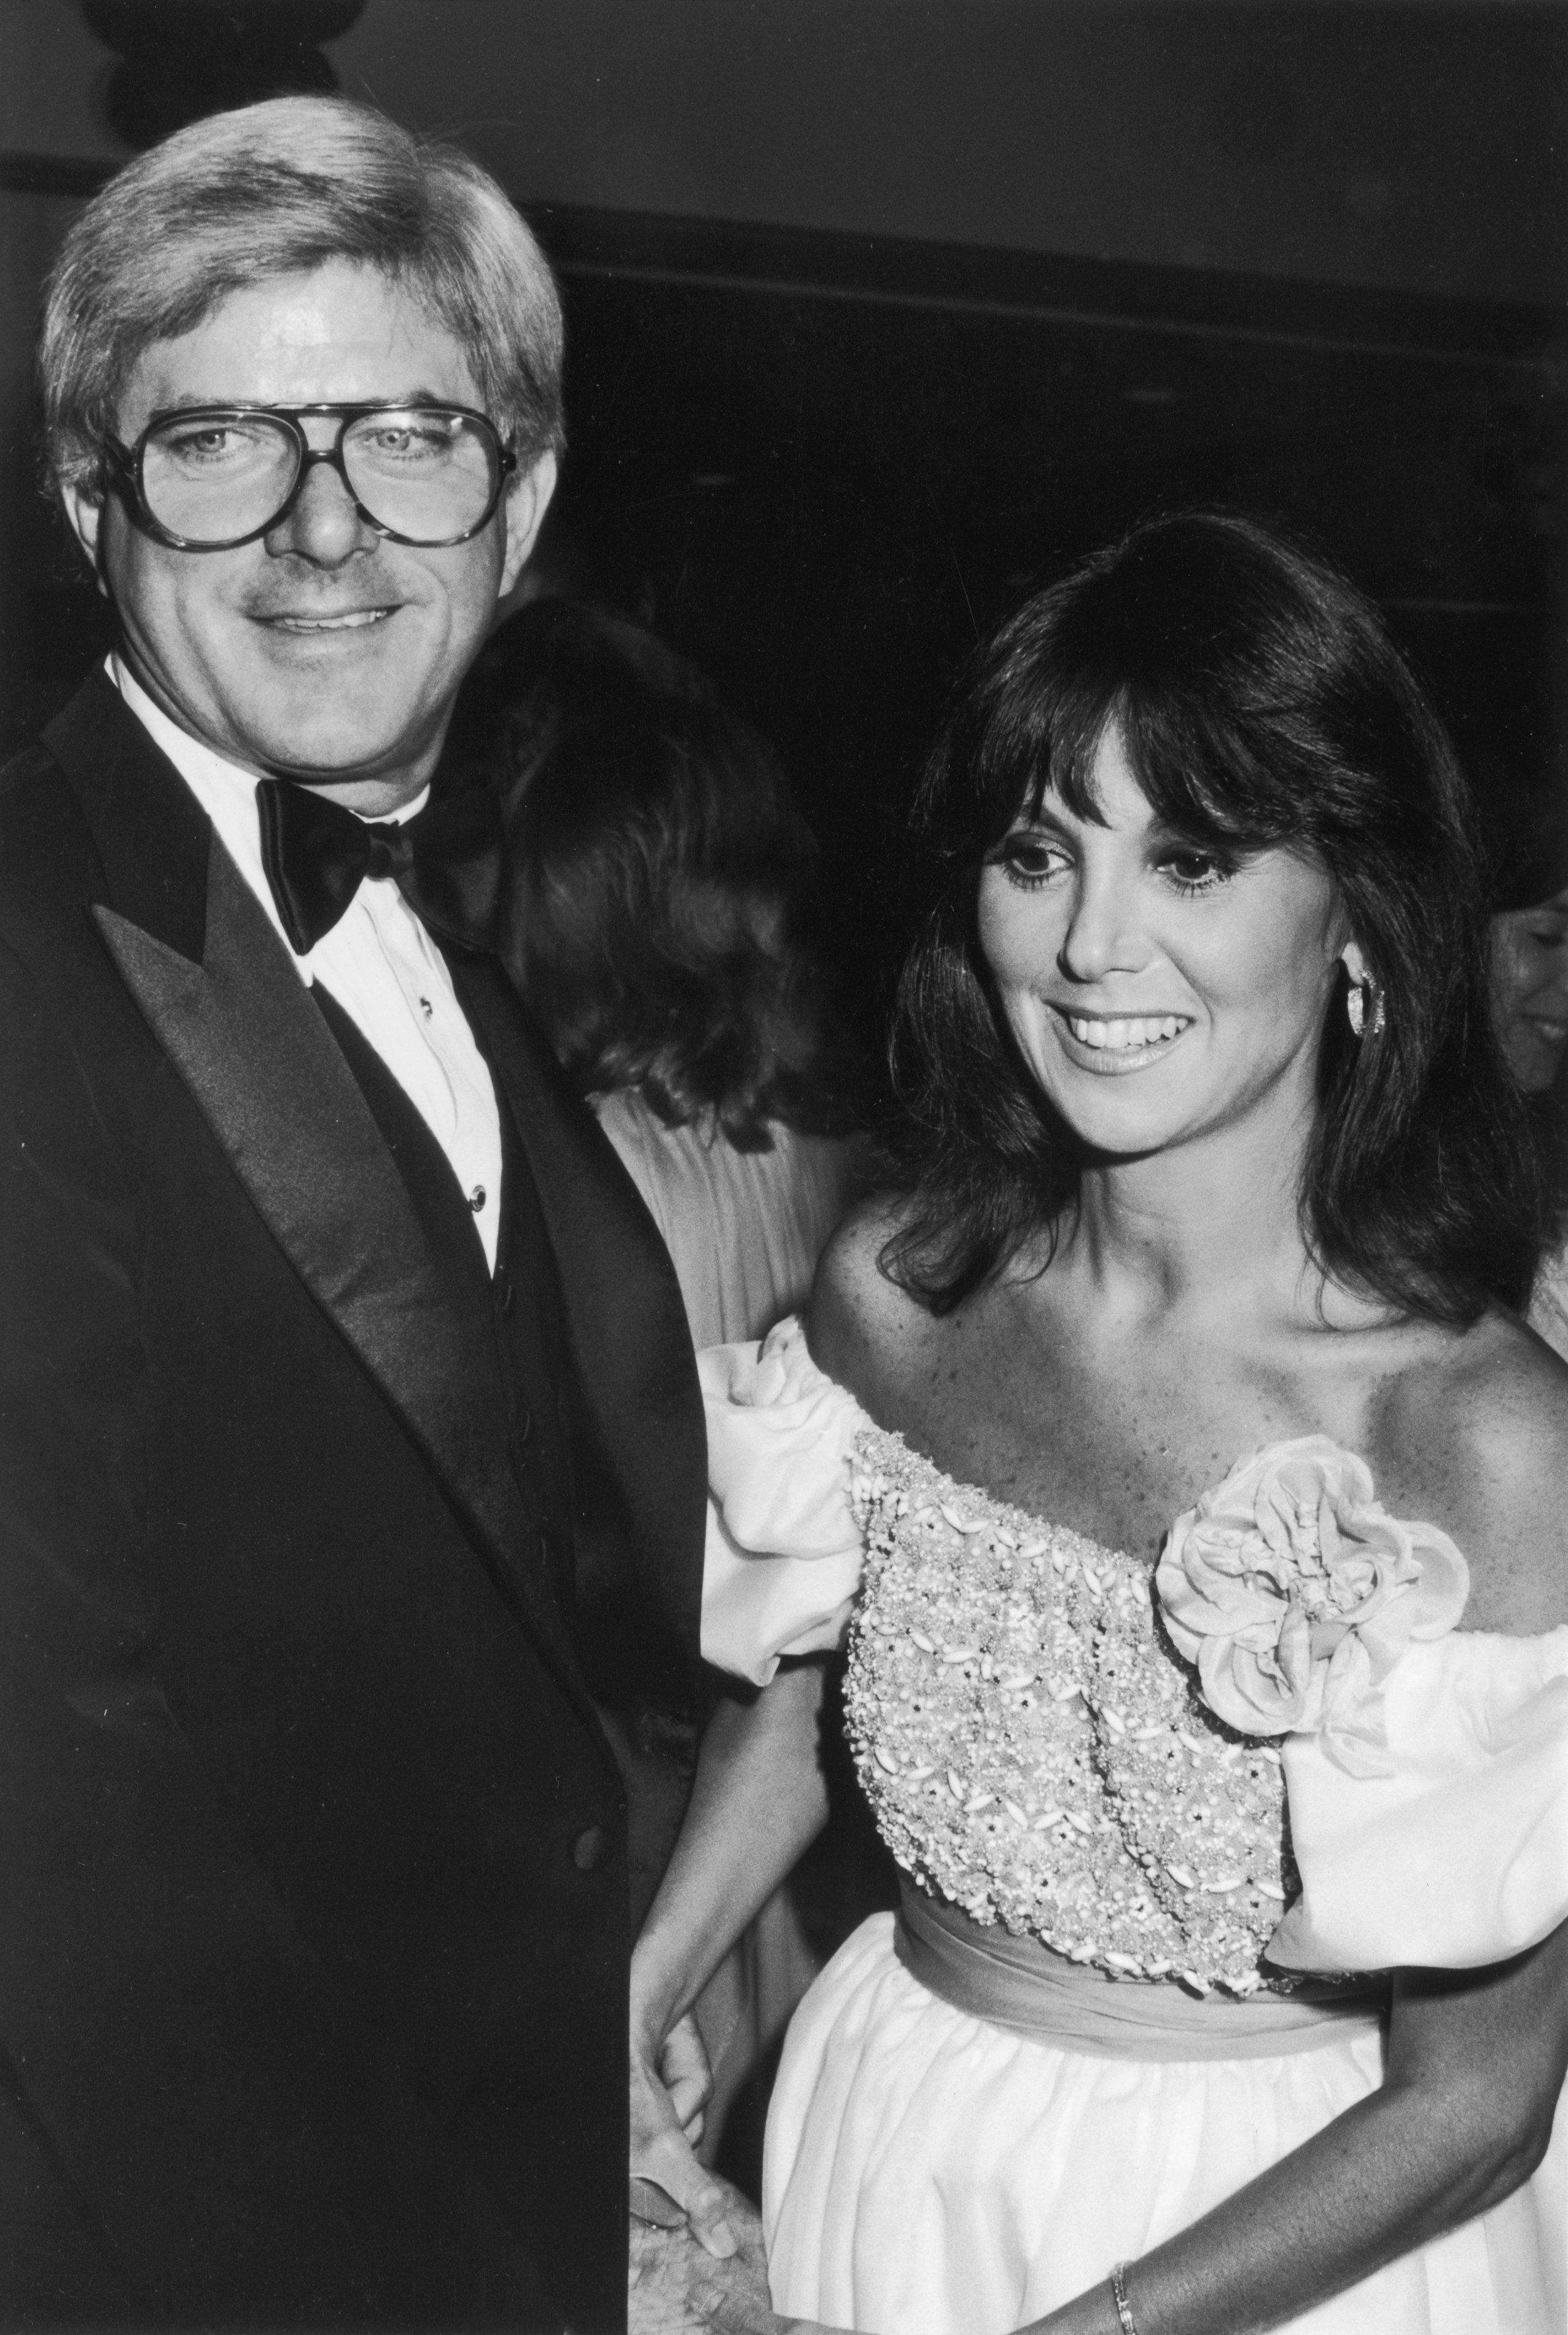 Phil Donahue and Marlo Thomas at a St. Jude Hospital charity dinner in Los Angeles, California, circa 1981 | Source: Getty Images